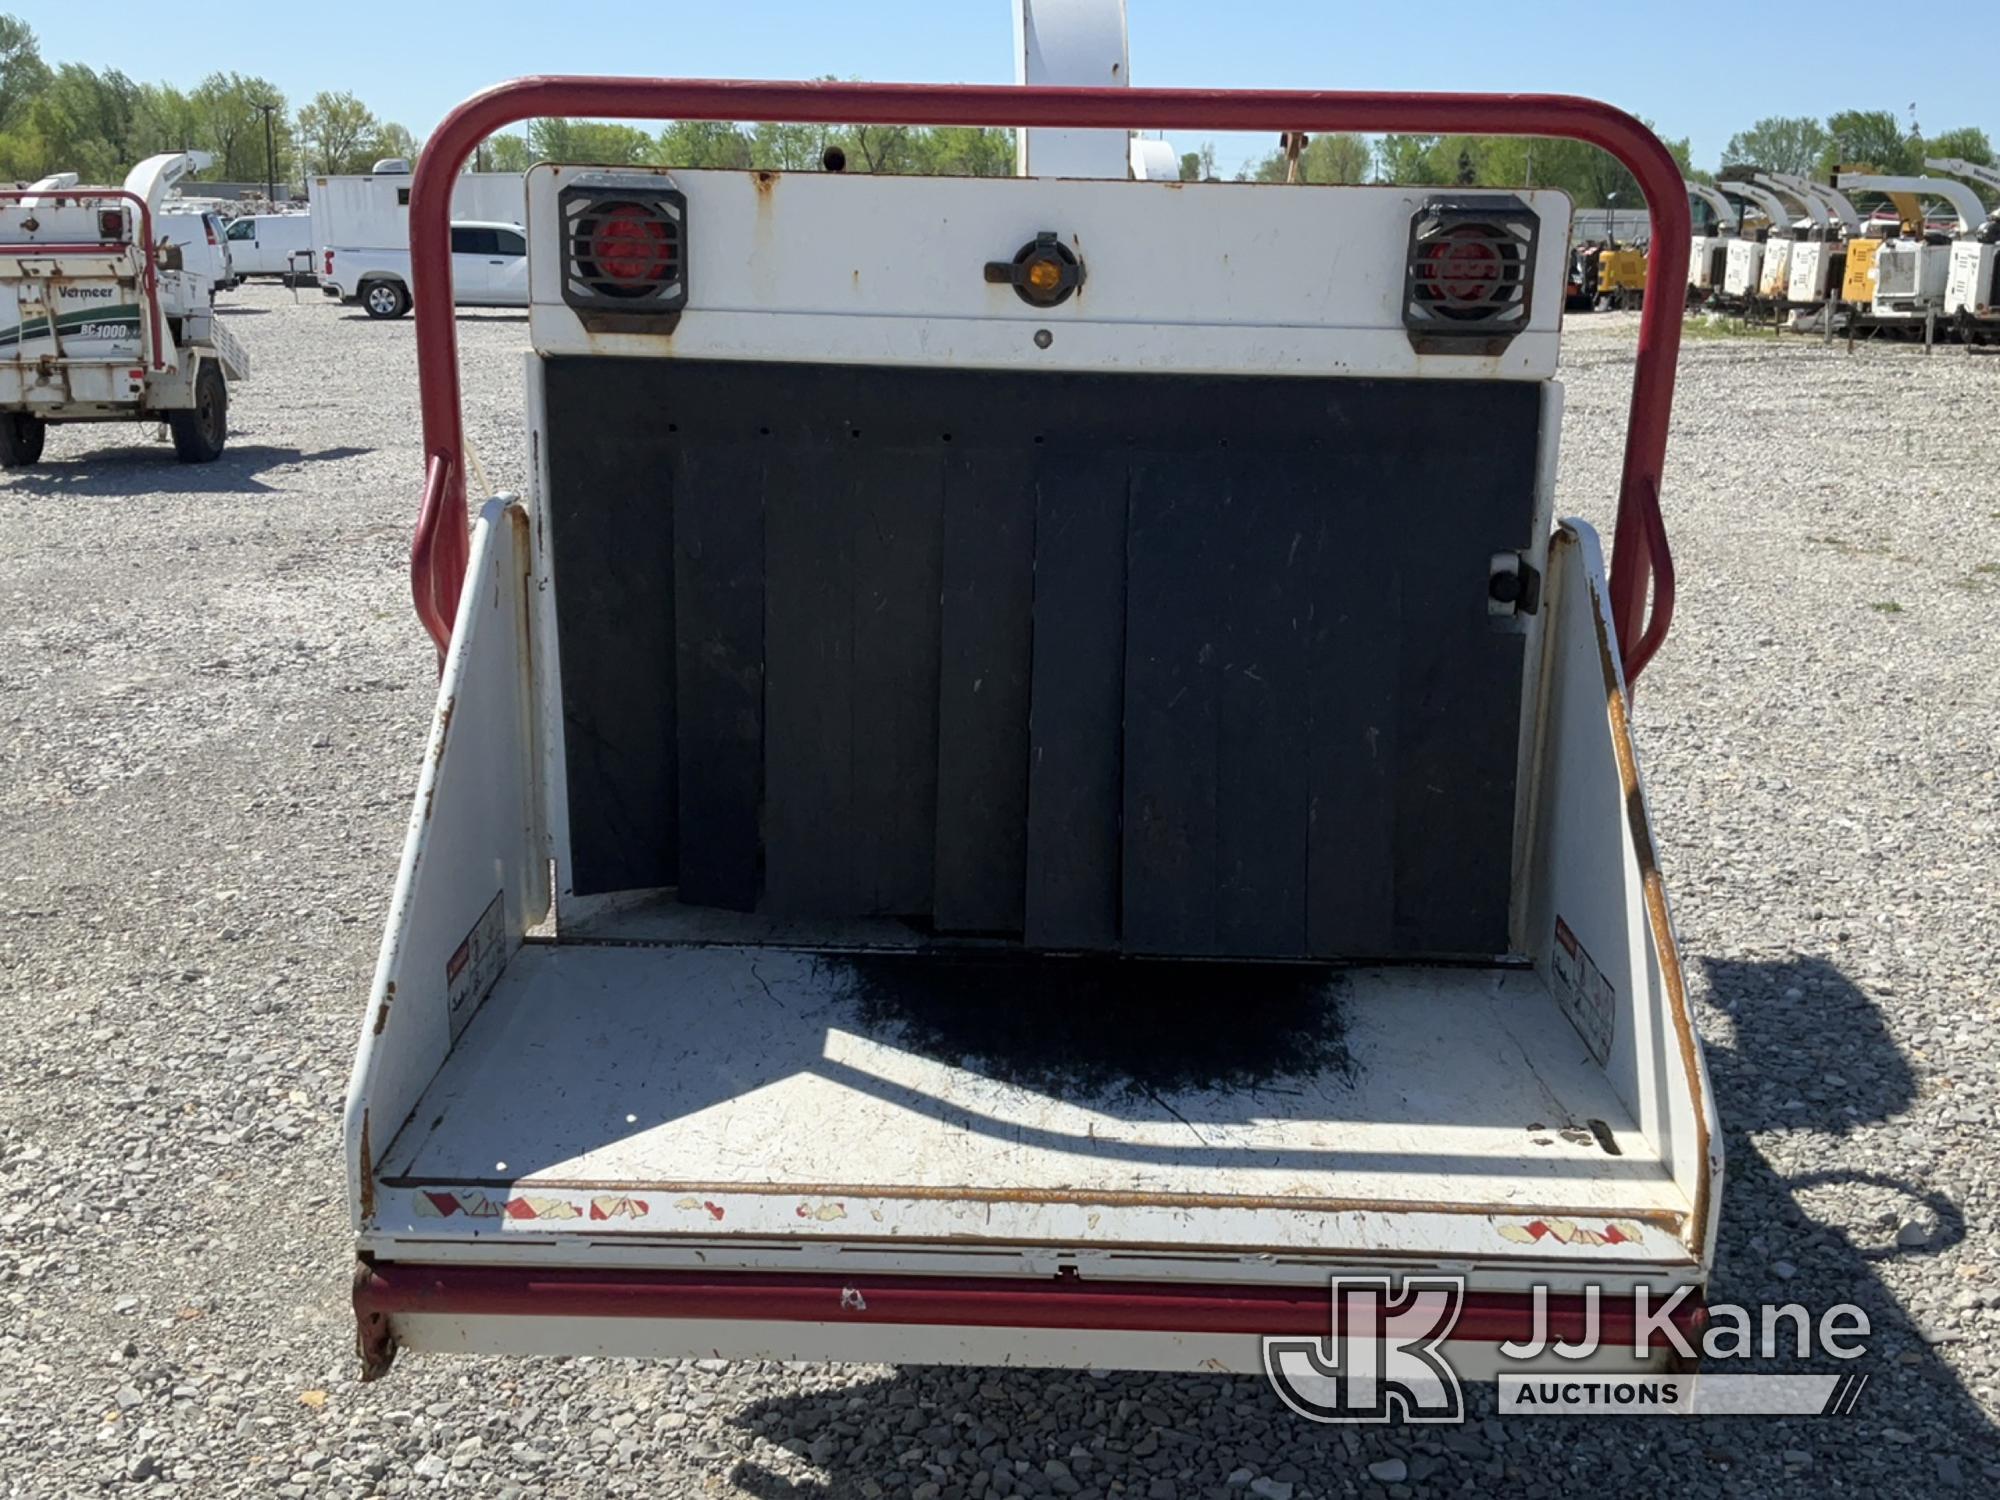 (Hawk Point, MO) 2015 Vermeer BC1000XL Chipper (12in Drum) No Title) (Runs & Operates) (Rust Damage)